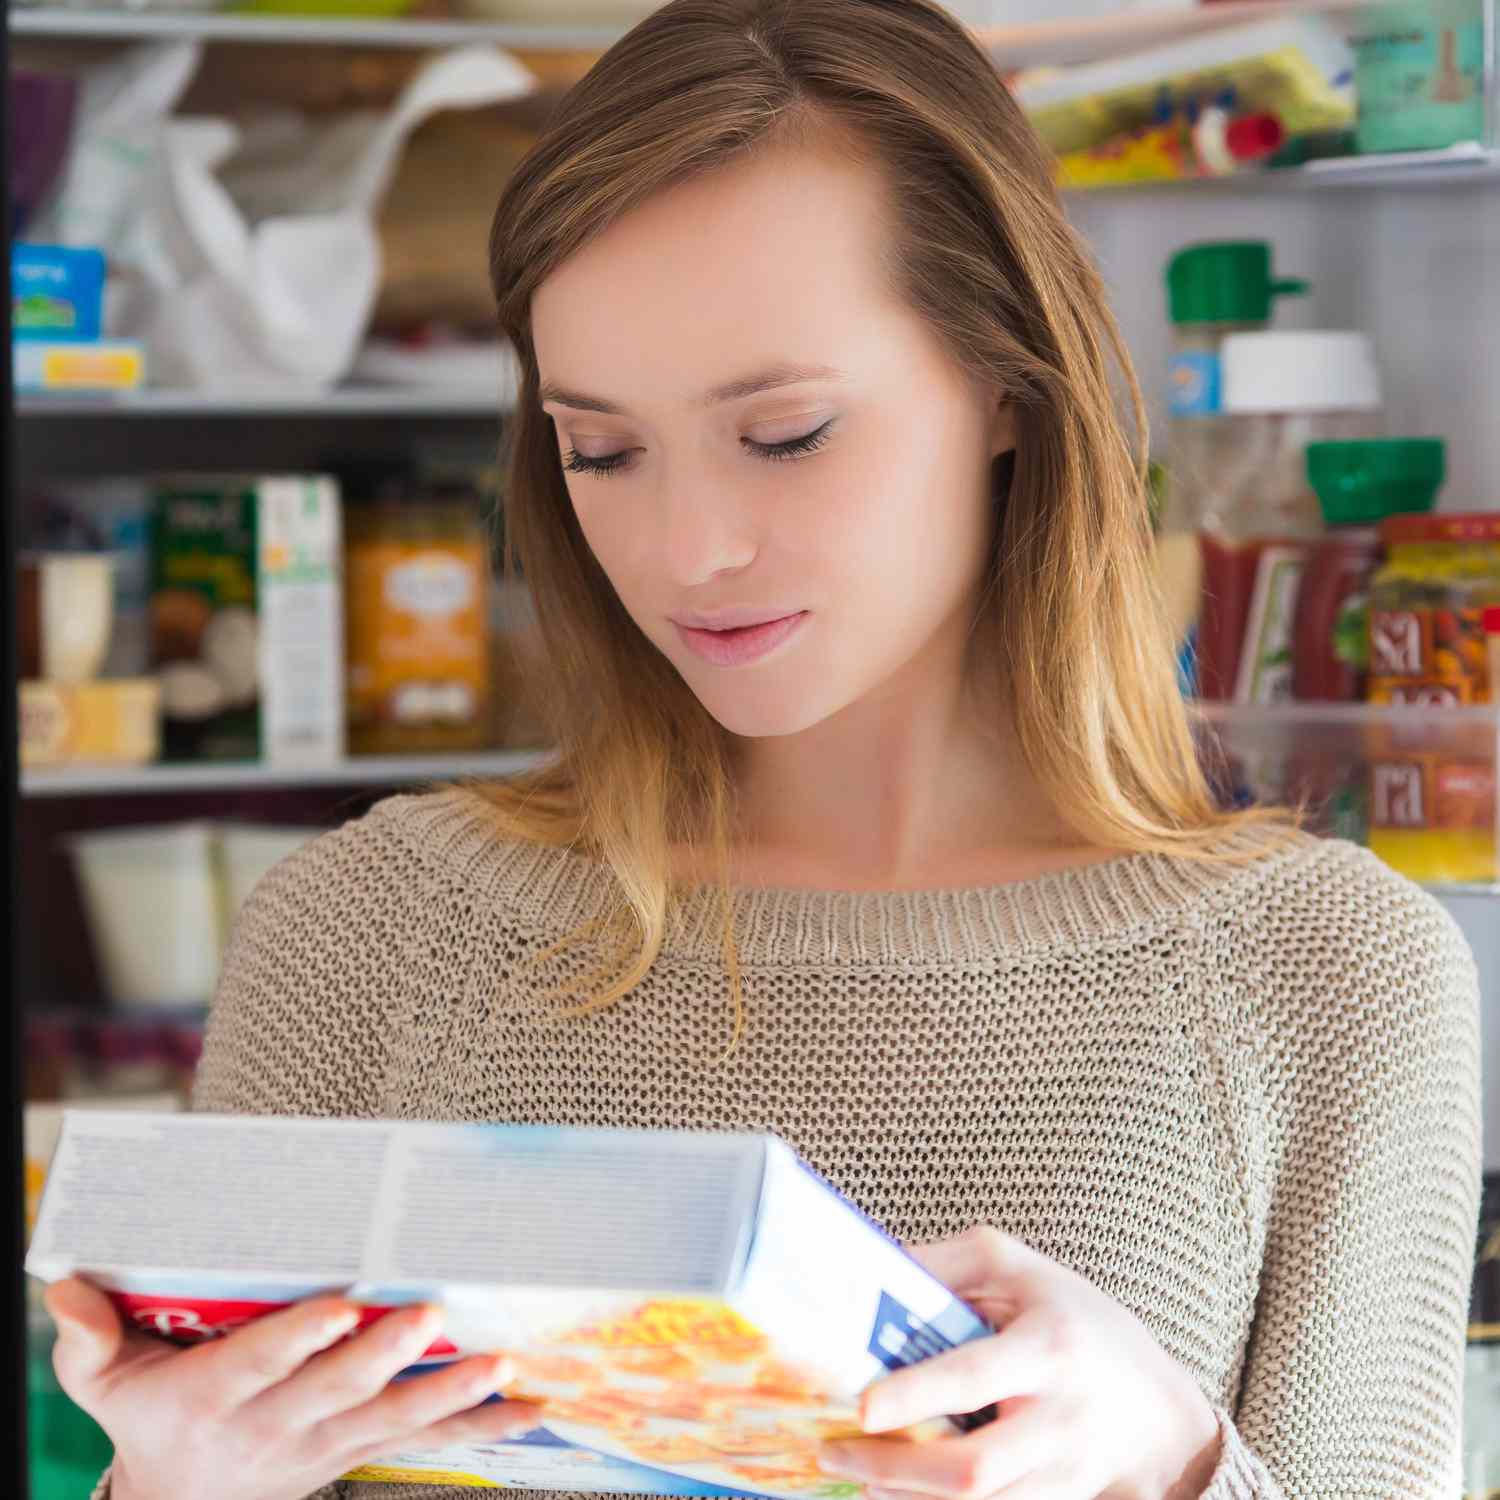 7 Crazy Food Additives You Probably Missed on the Nutrition Label